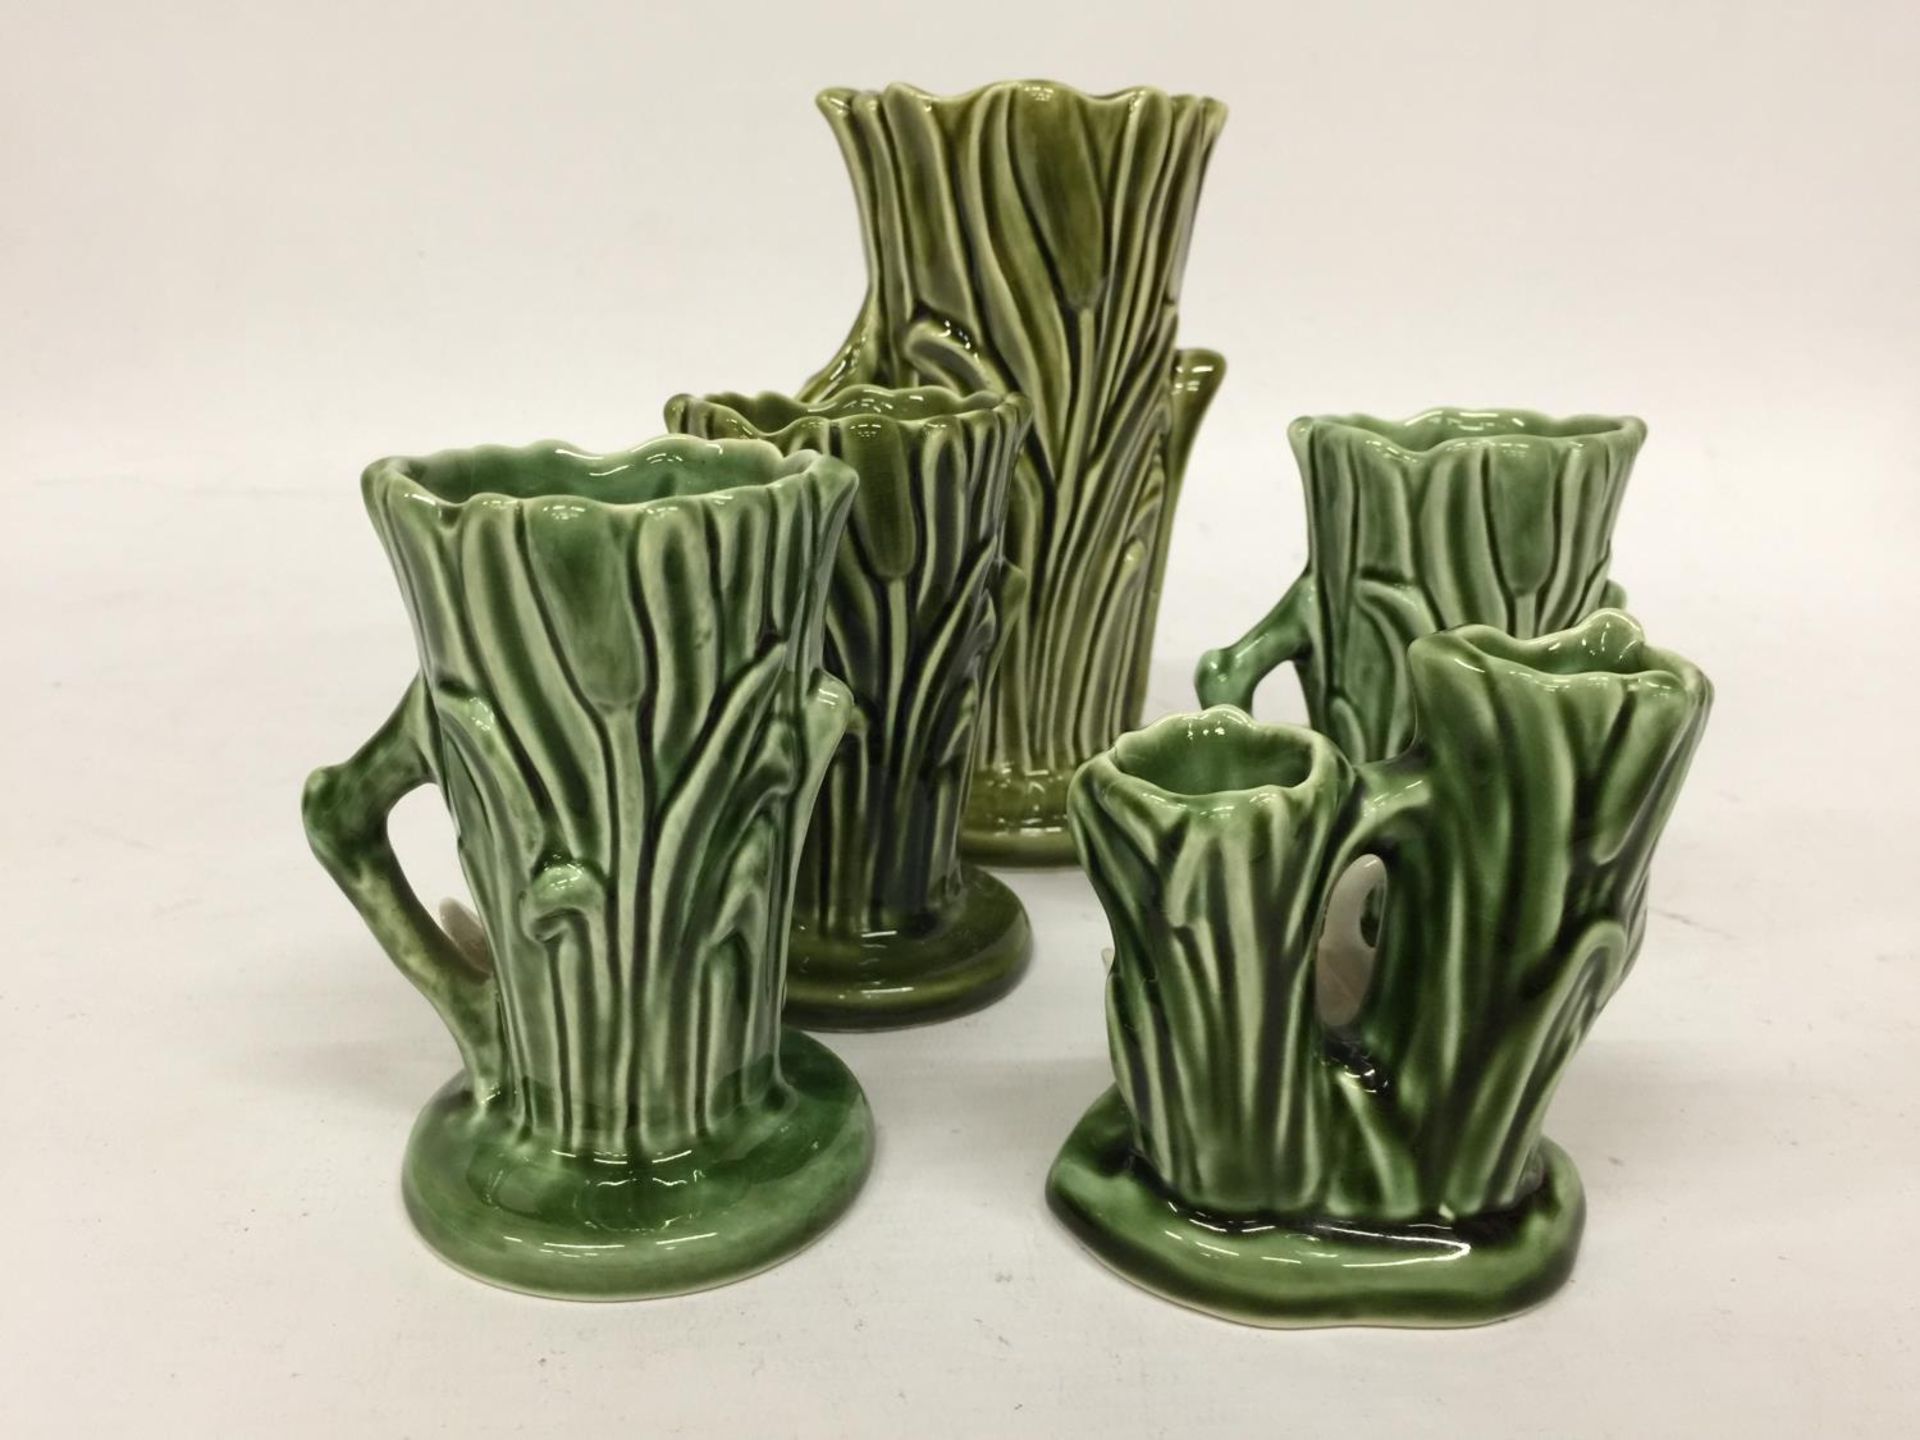 FOUR SYLVAC POTTERY SWAN SPILL VASES - Image 3 of 4